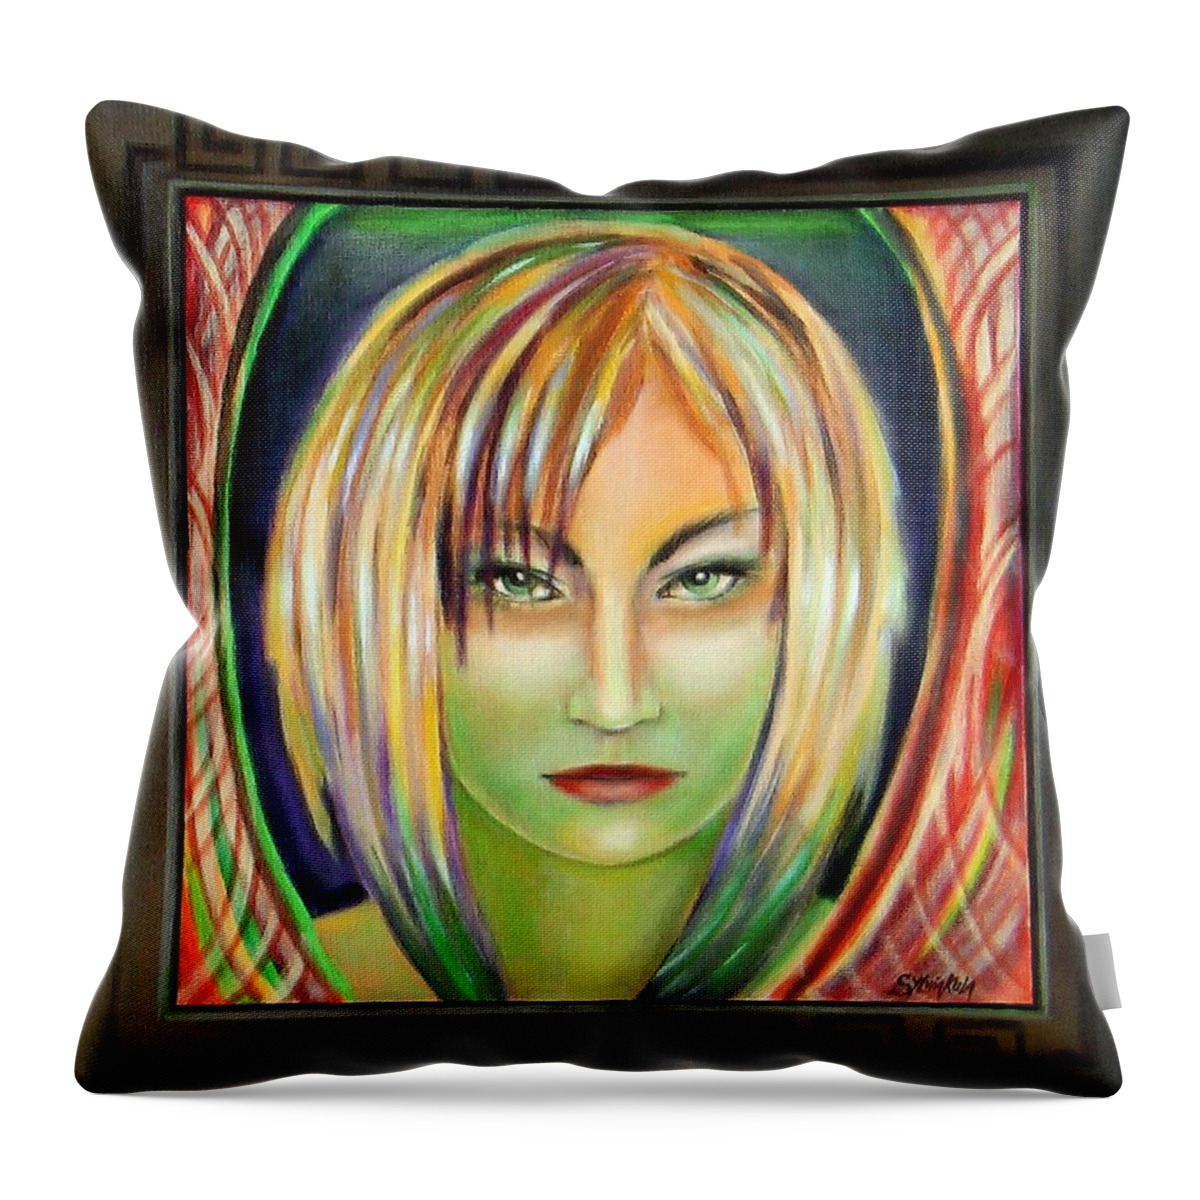 Woman Throw Pillow featuring the painting Emerald Girl by Sylvia Kula